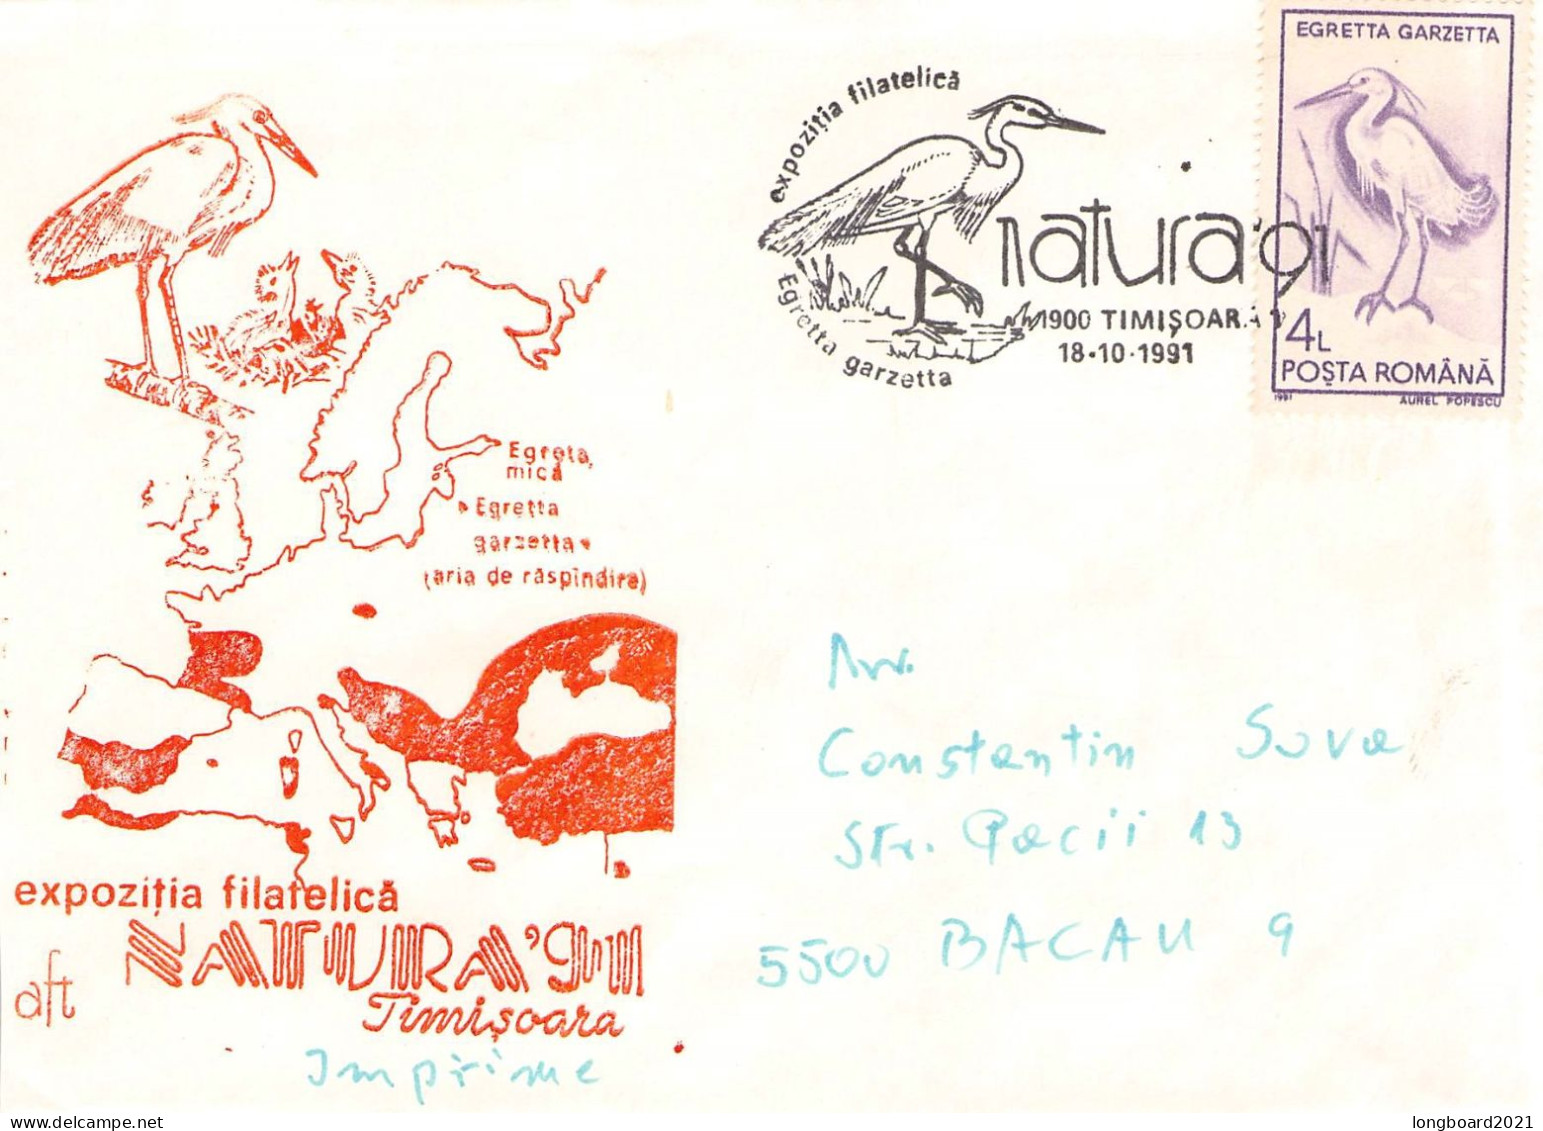 ROMANIA - SPECIAL COVER AND CANCELLATION 1991 NATURA '91 / 7056 - Covers & Documents